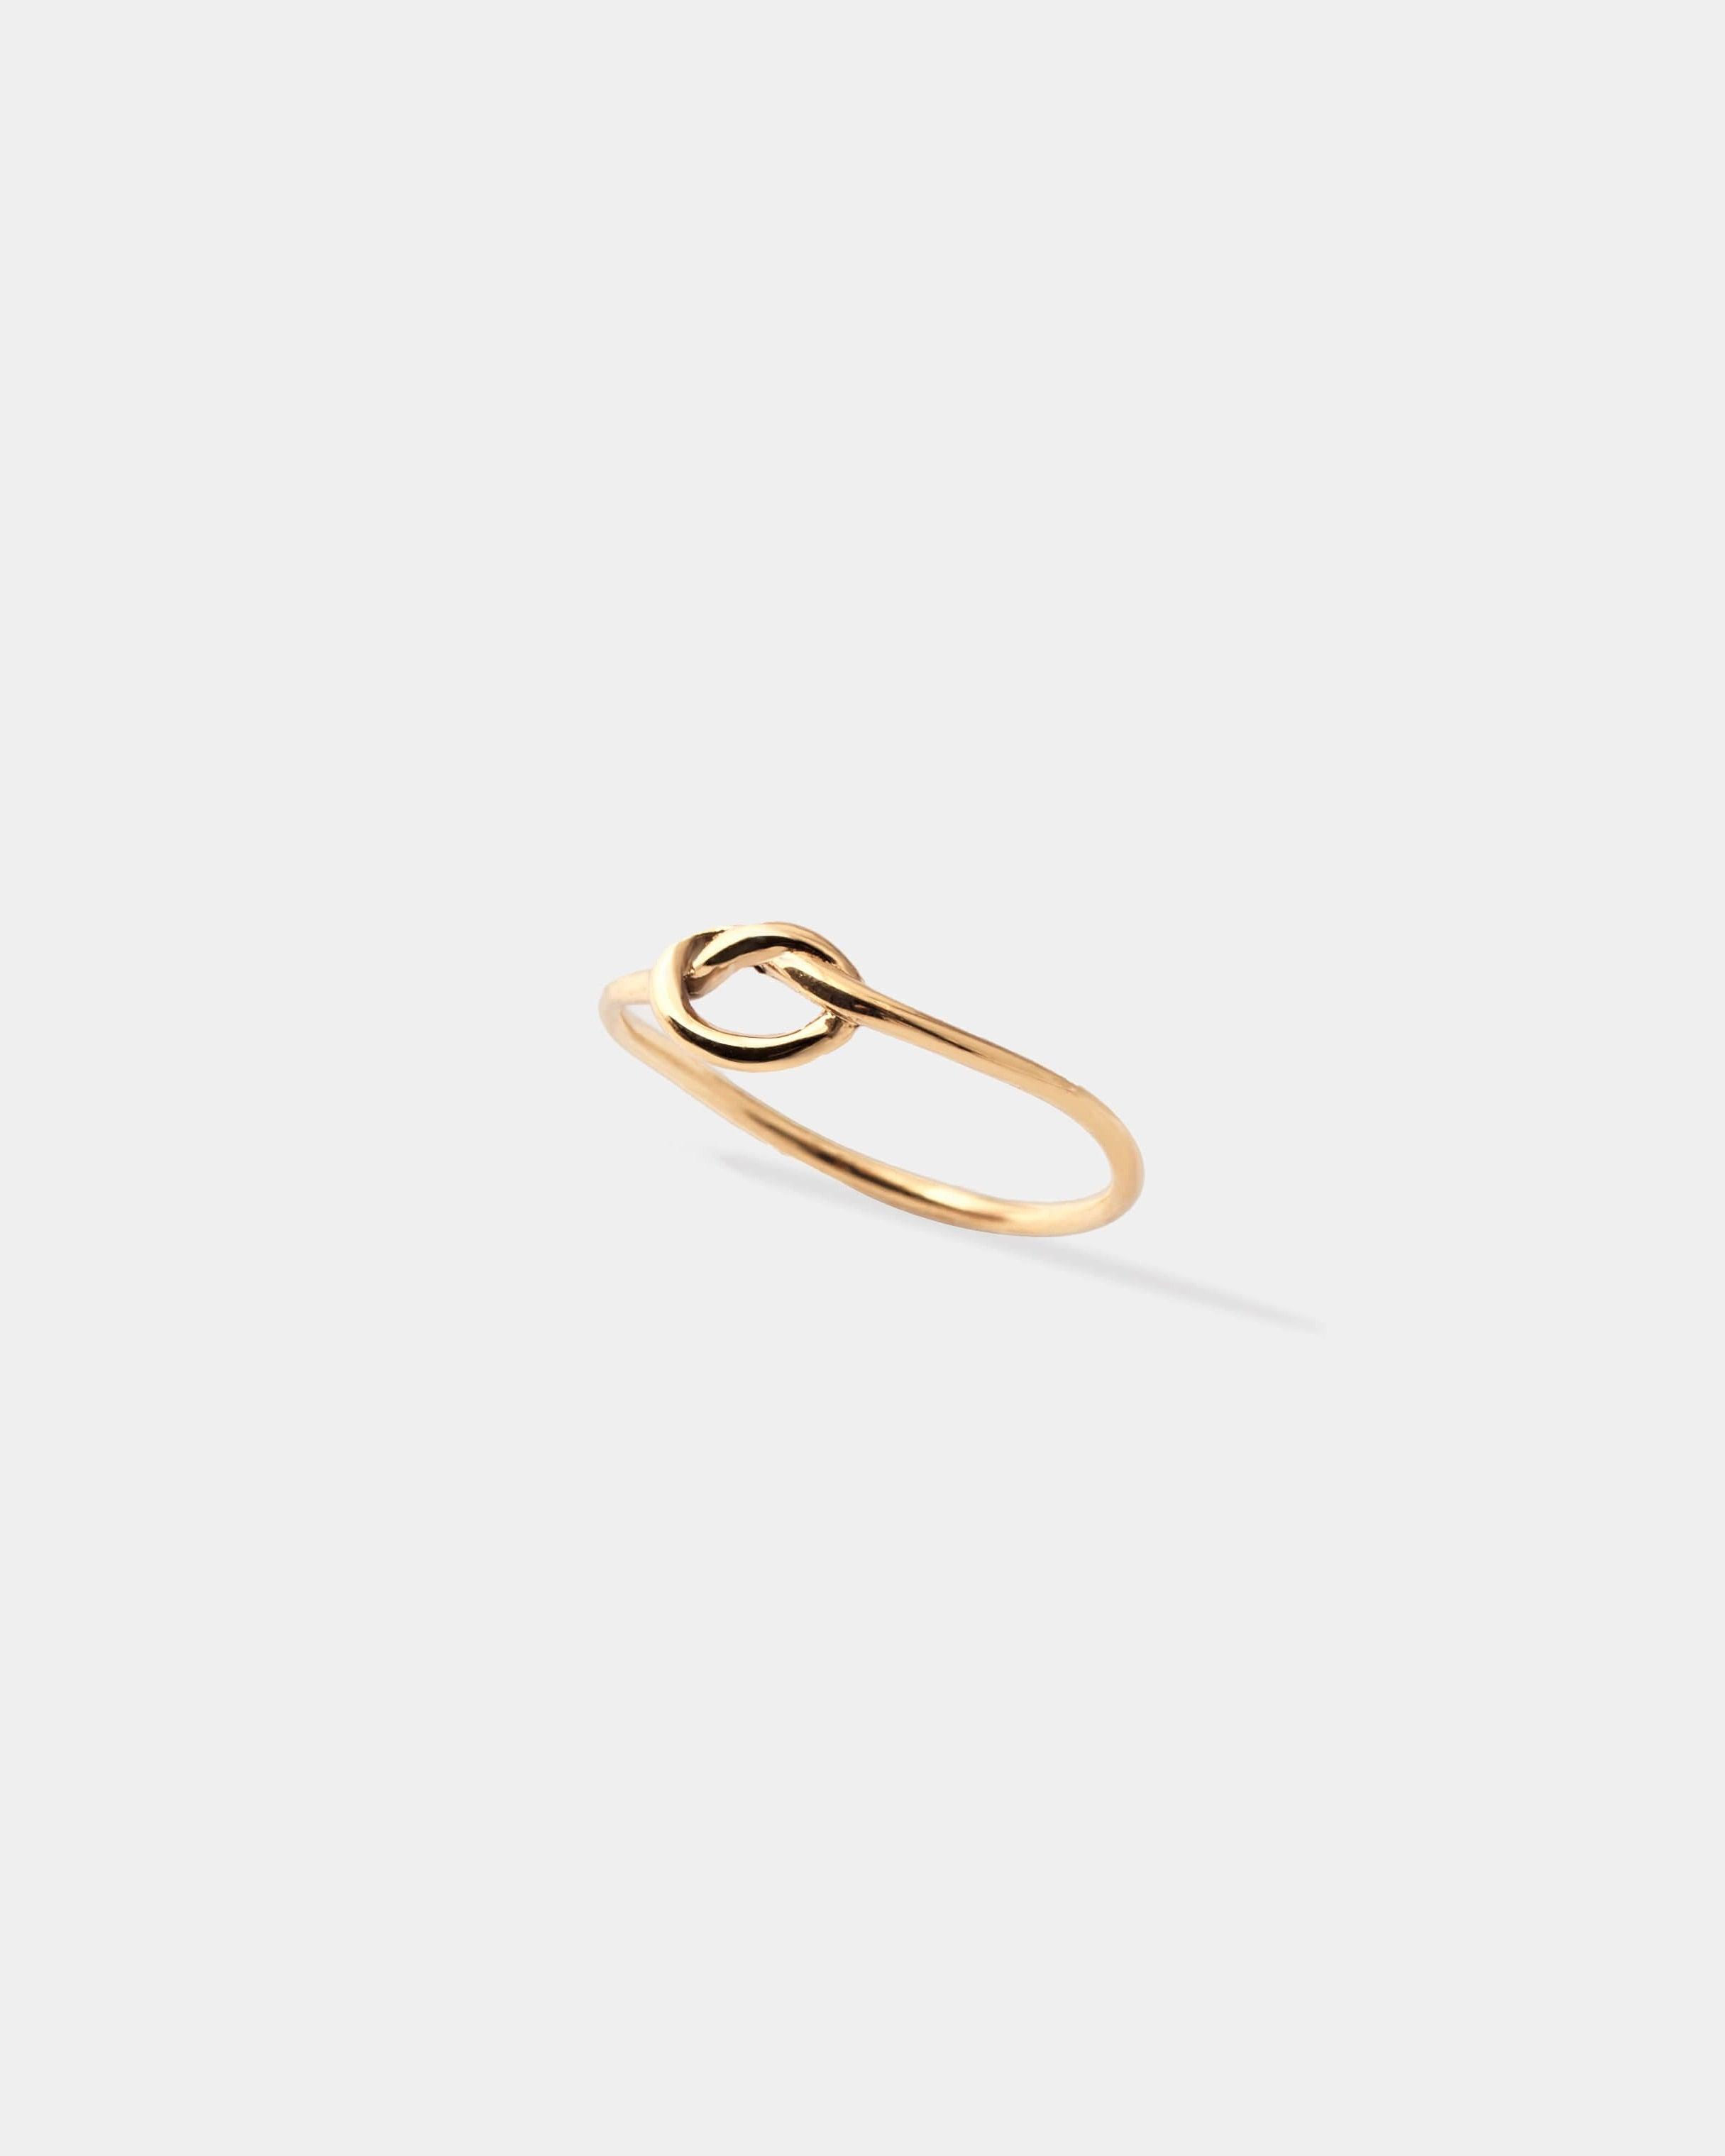 SLIM KNOT RING - LIMELY